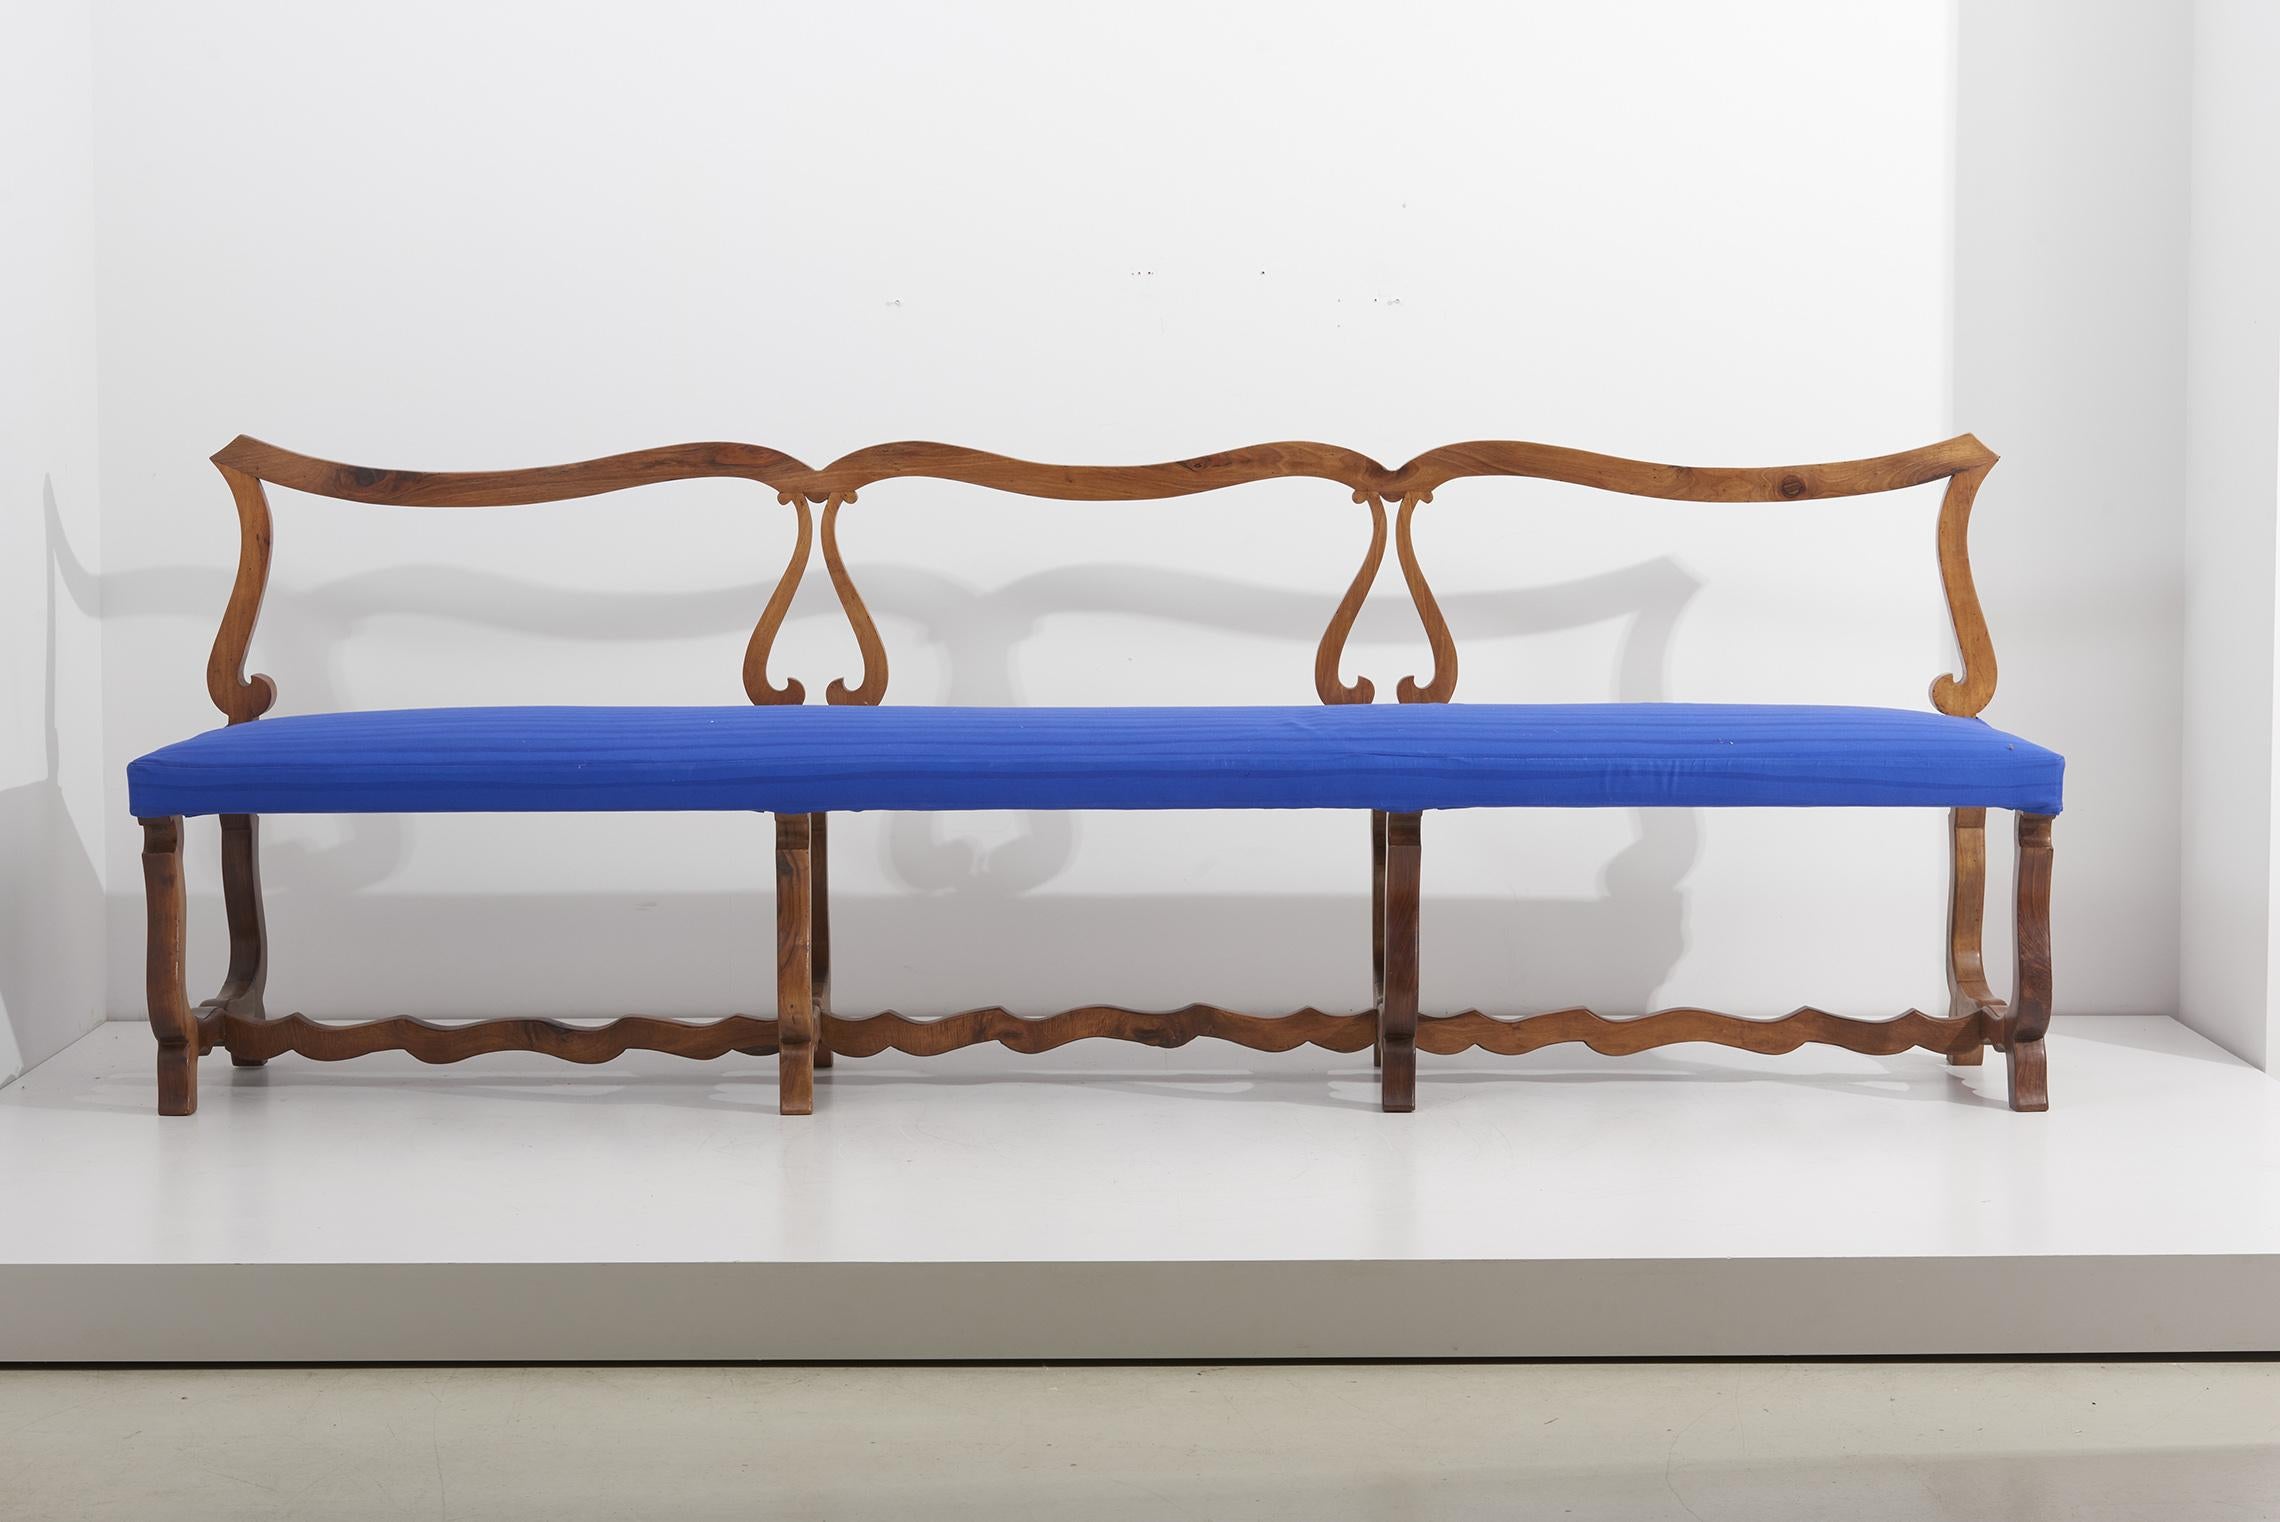 Bench in Spanish walnut and blue Dedar upholstery with hand painted stripes.